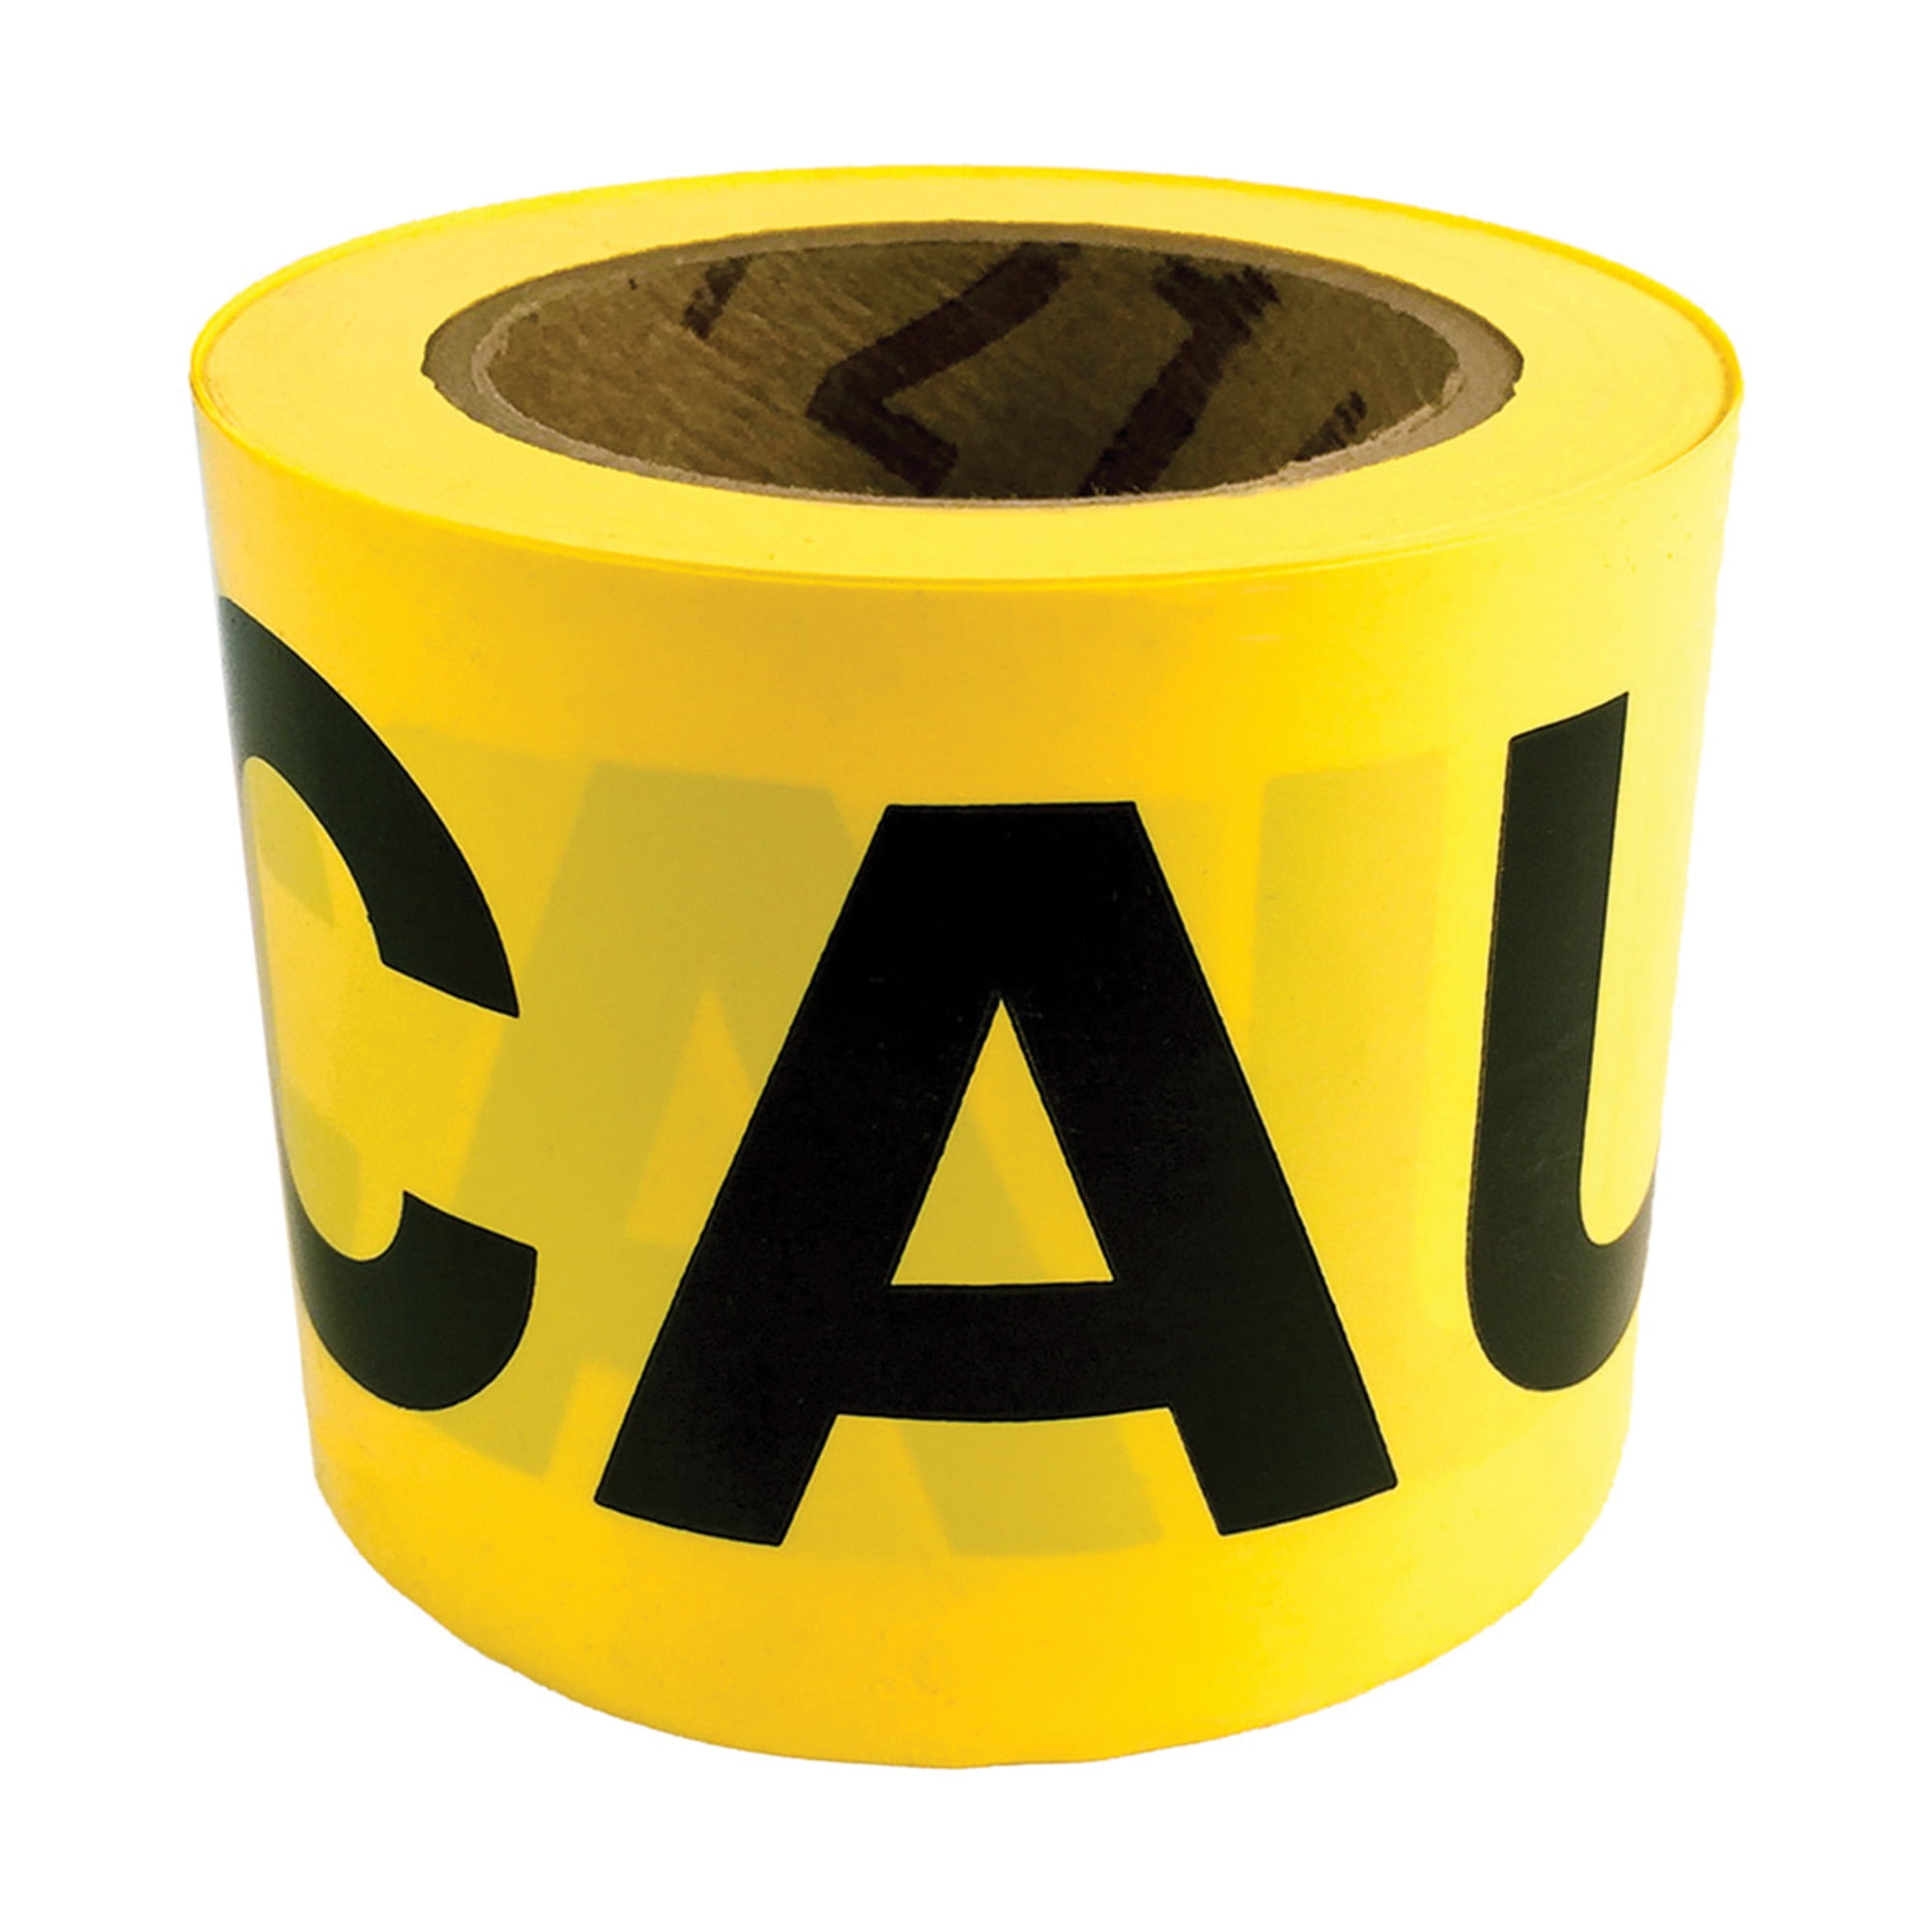 SAFETY TAPE 3" X 25' CAUTION TAPE YELLOW HALLOWEEN PARTY DECORATIONS 